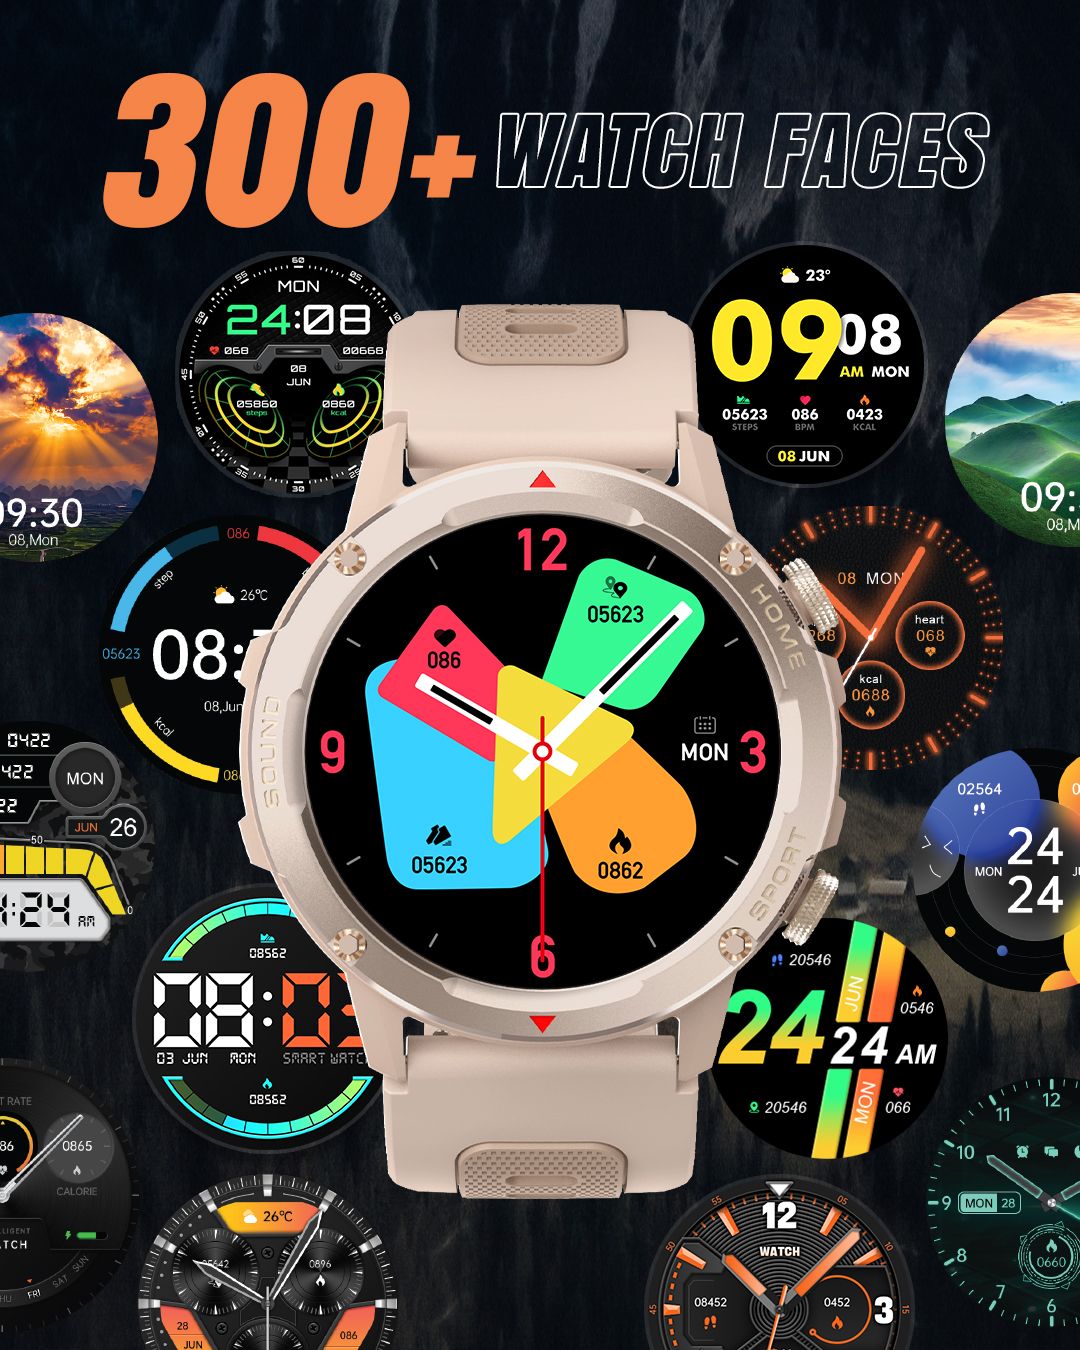 Thunder Smart Watch 300+ Faces